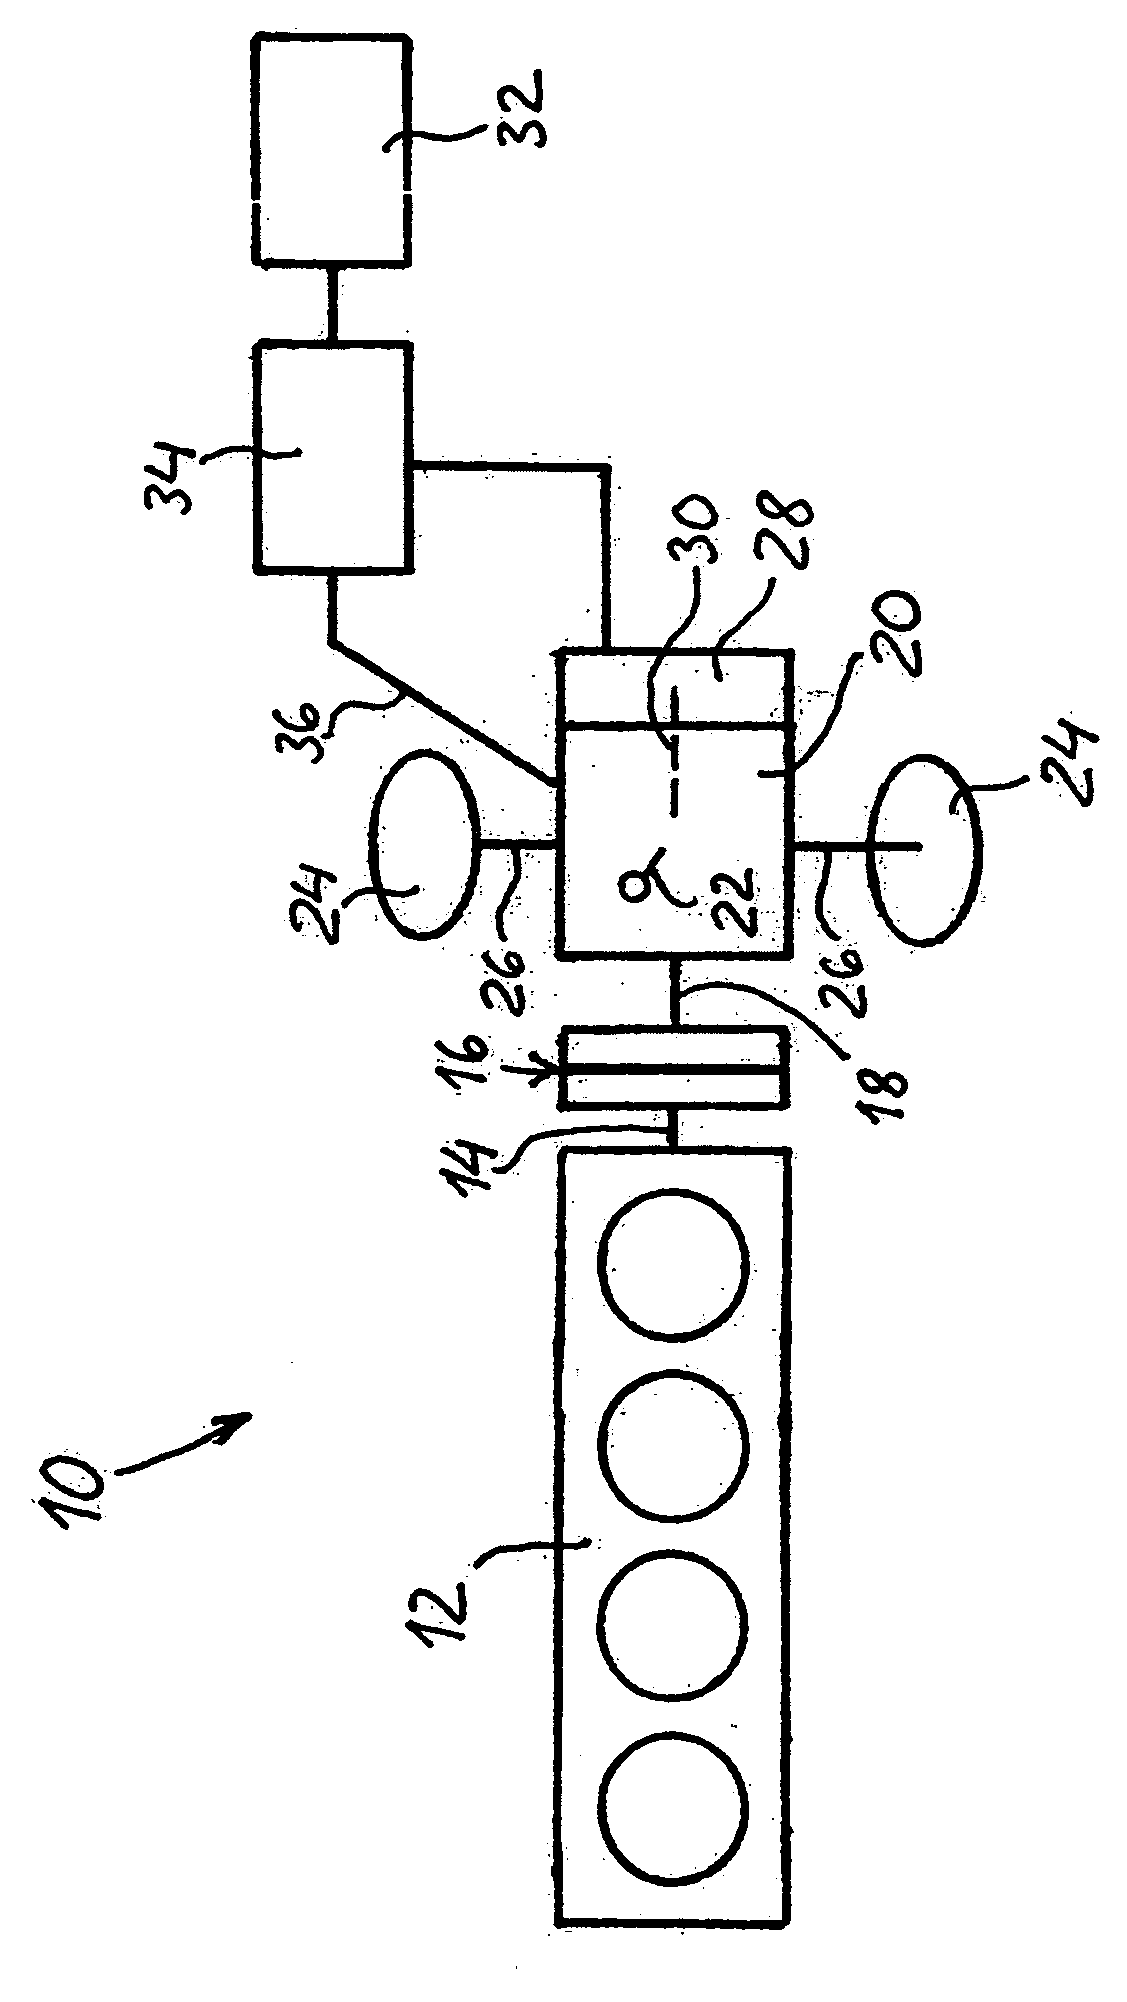 Hybrid drive unit, and method of controlling a gear shift sequence in a manual shift transmission of a hybrid drive unit